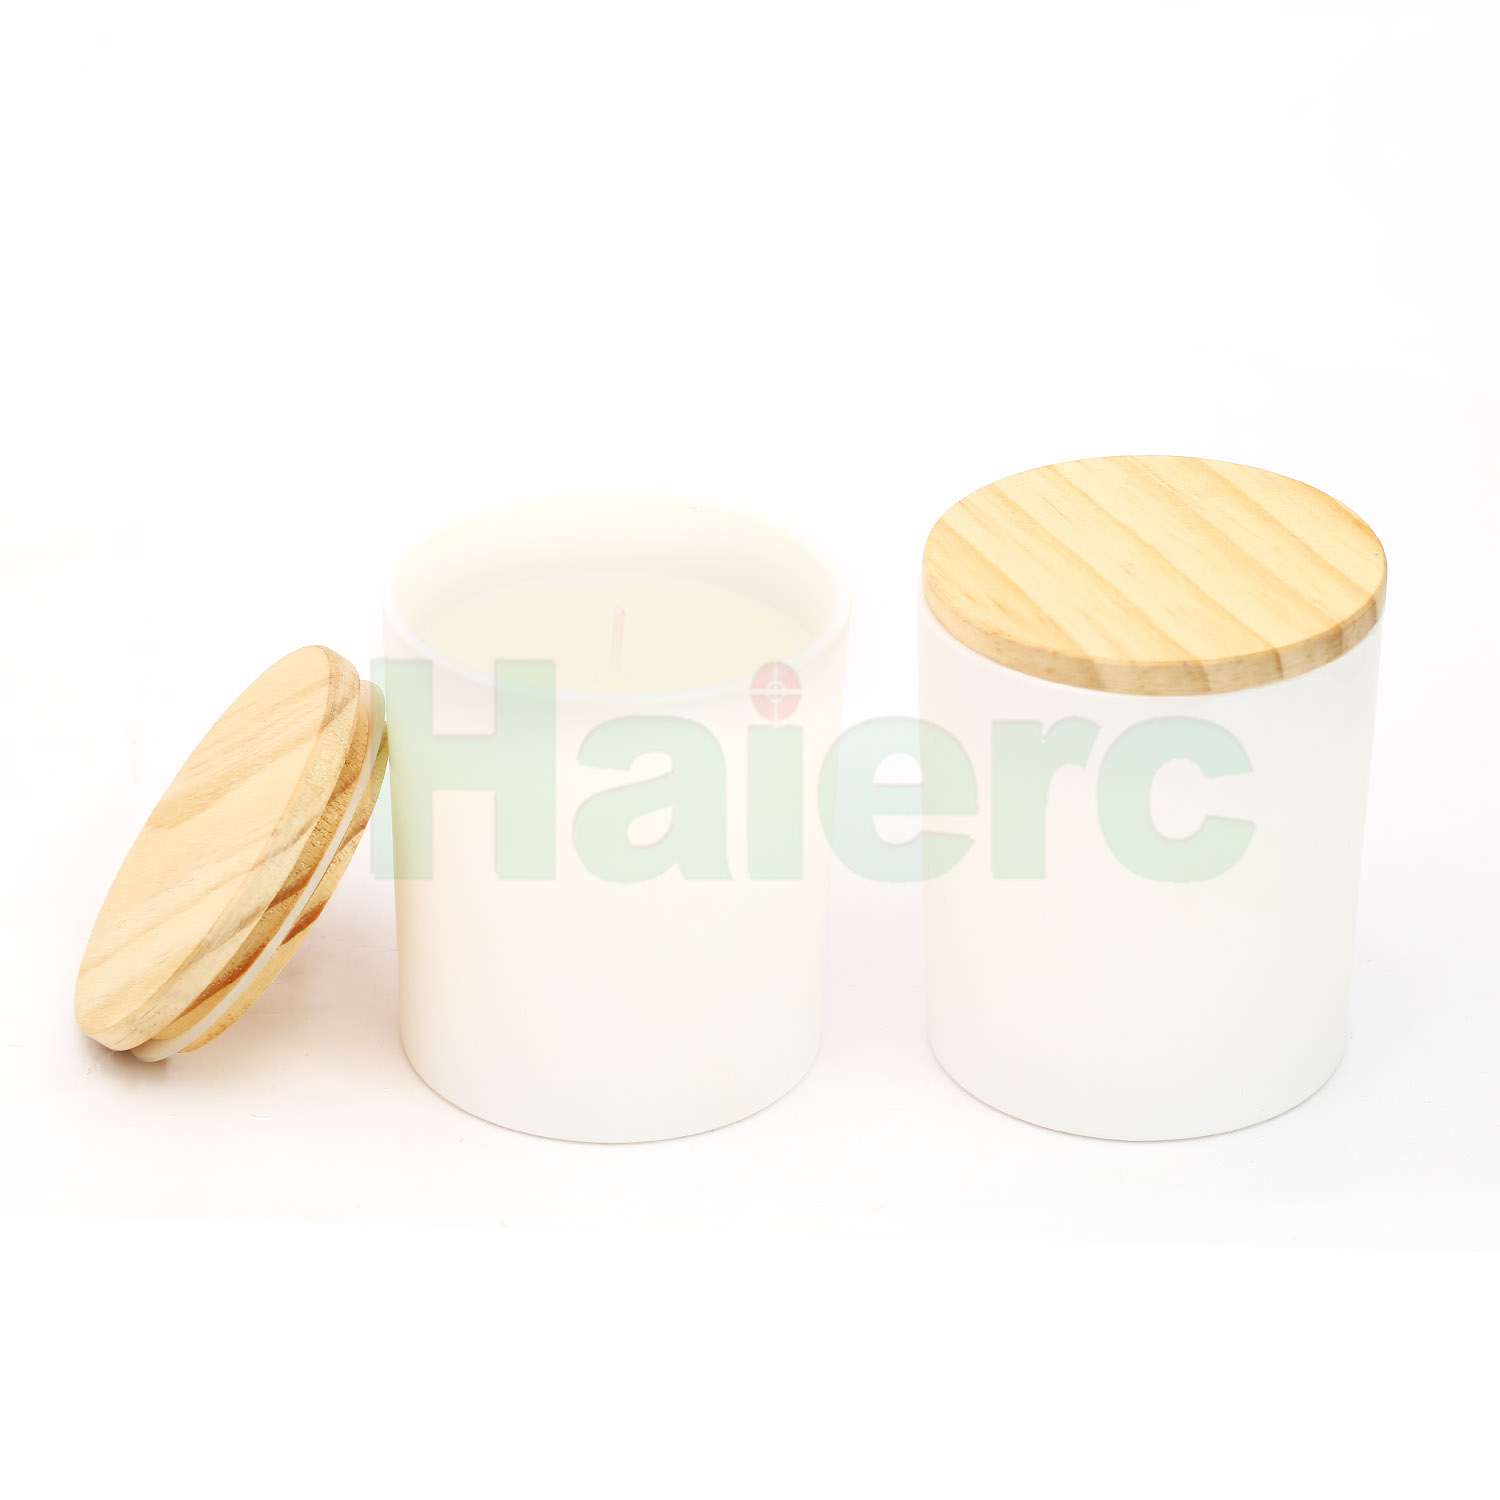 >Haierc Wholesale Candles Home Bedroom Insect Bee&Soy Wax Anti-mosquito Scented Candles